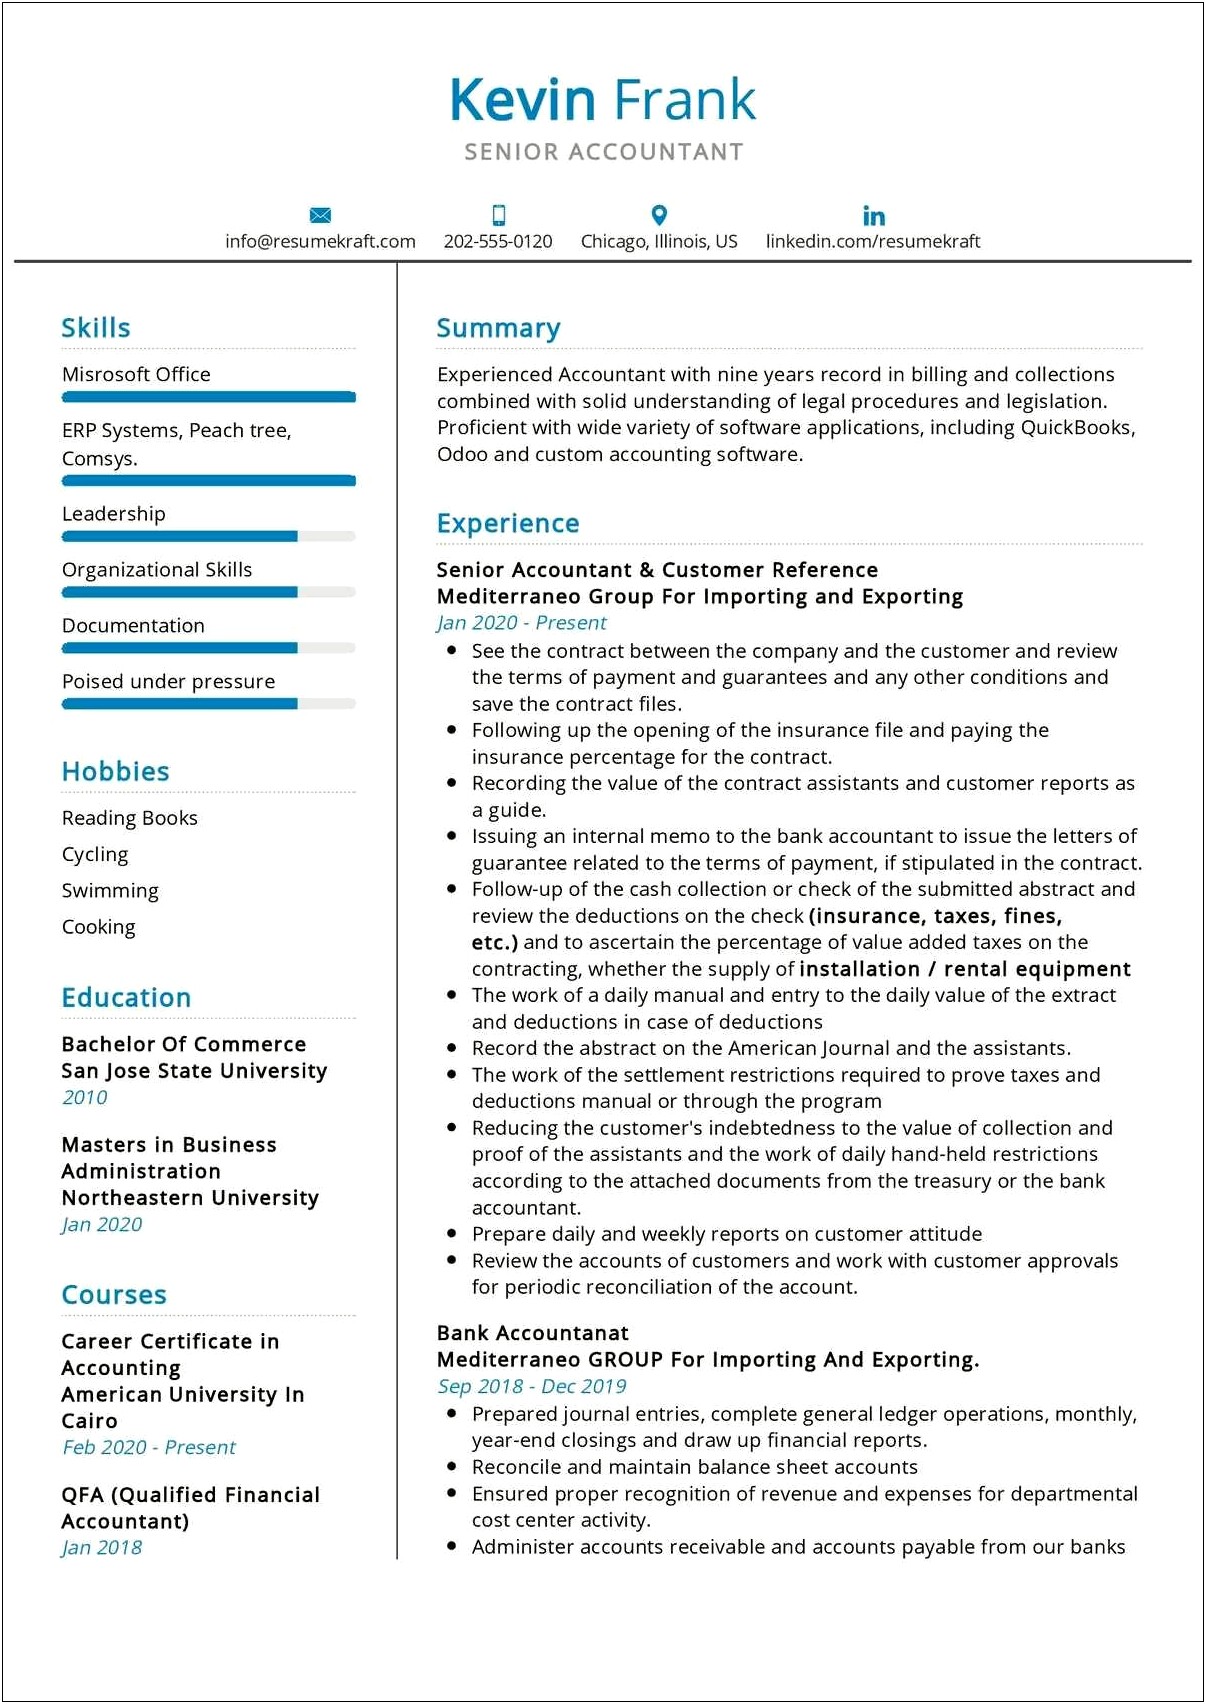 Resume Samples Uiuc Dual Degrees Finance And Accounting